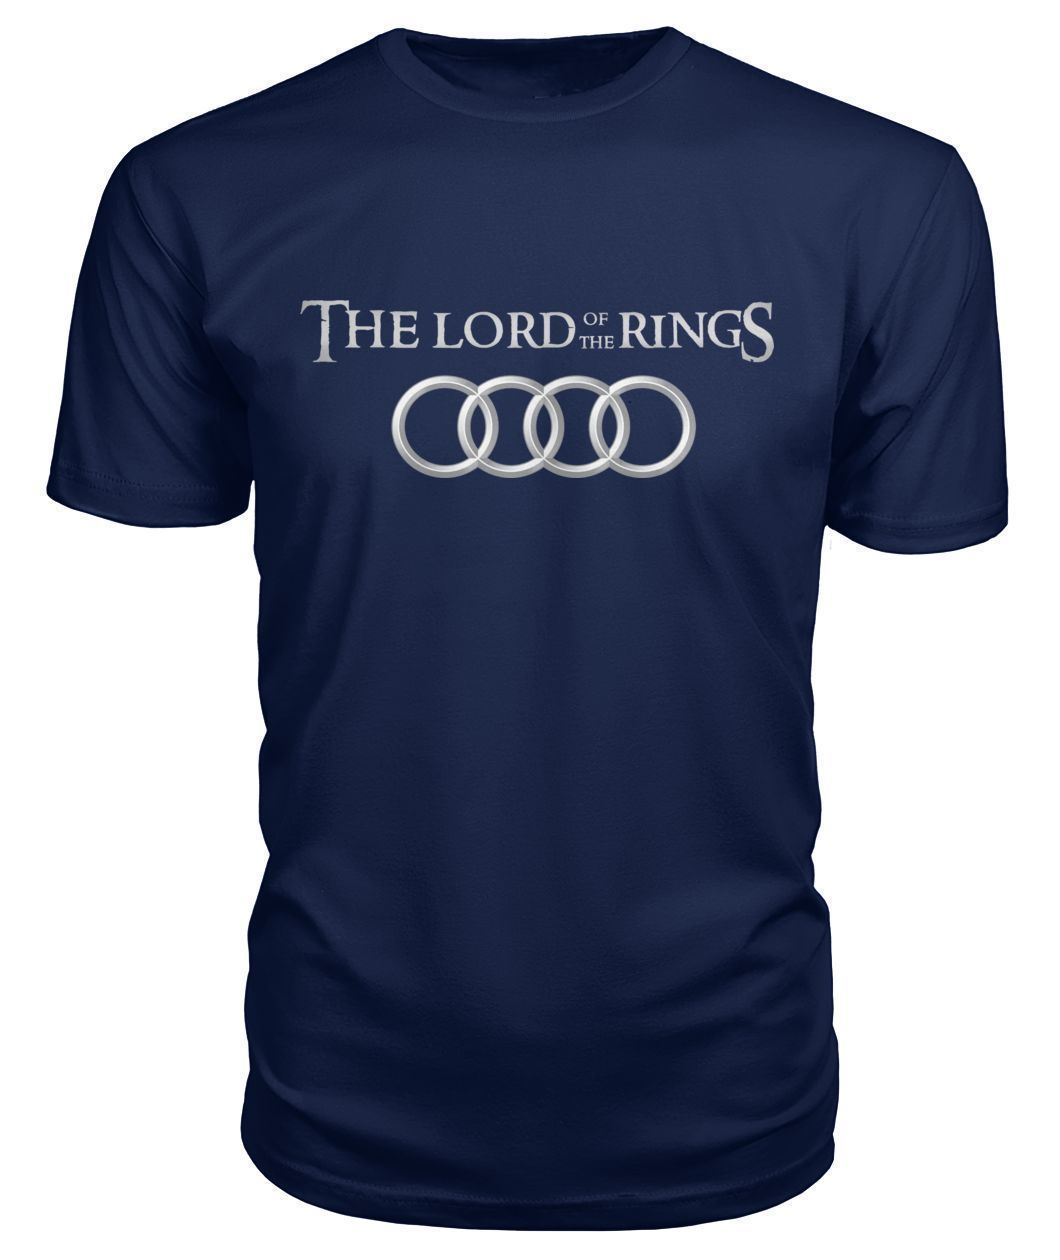 'Lord of the Rings' Tee - AudiLovers